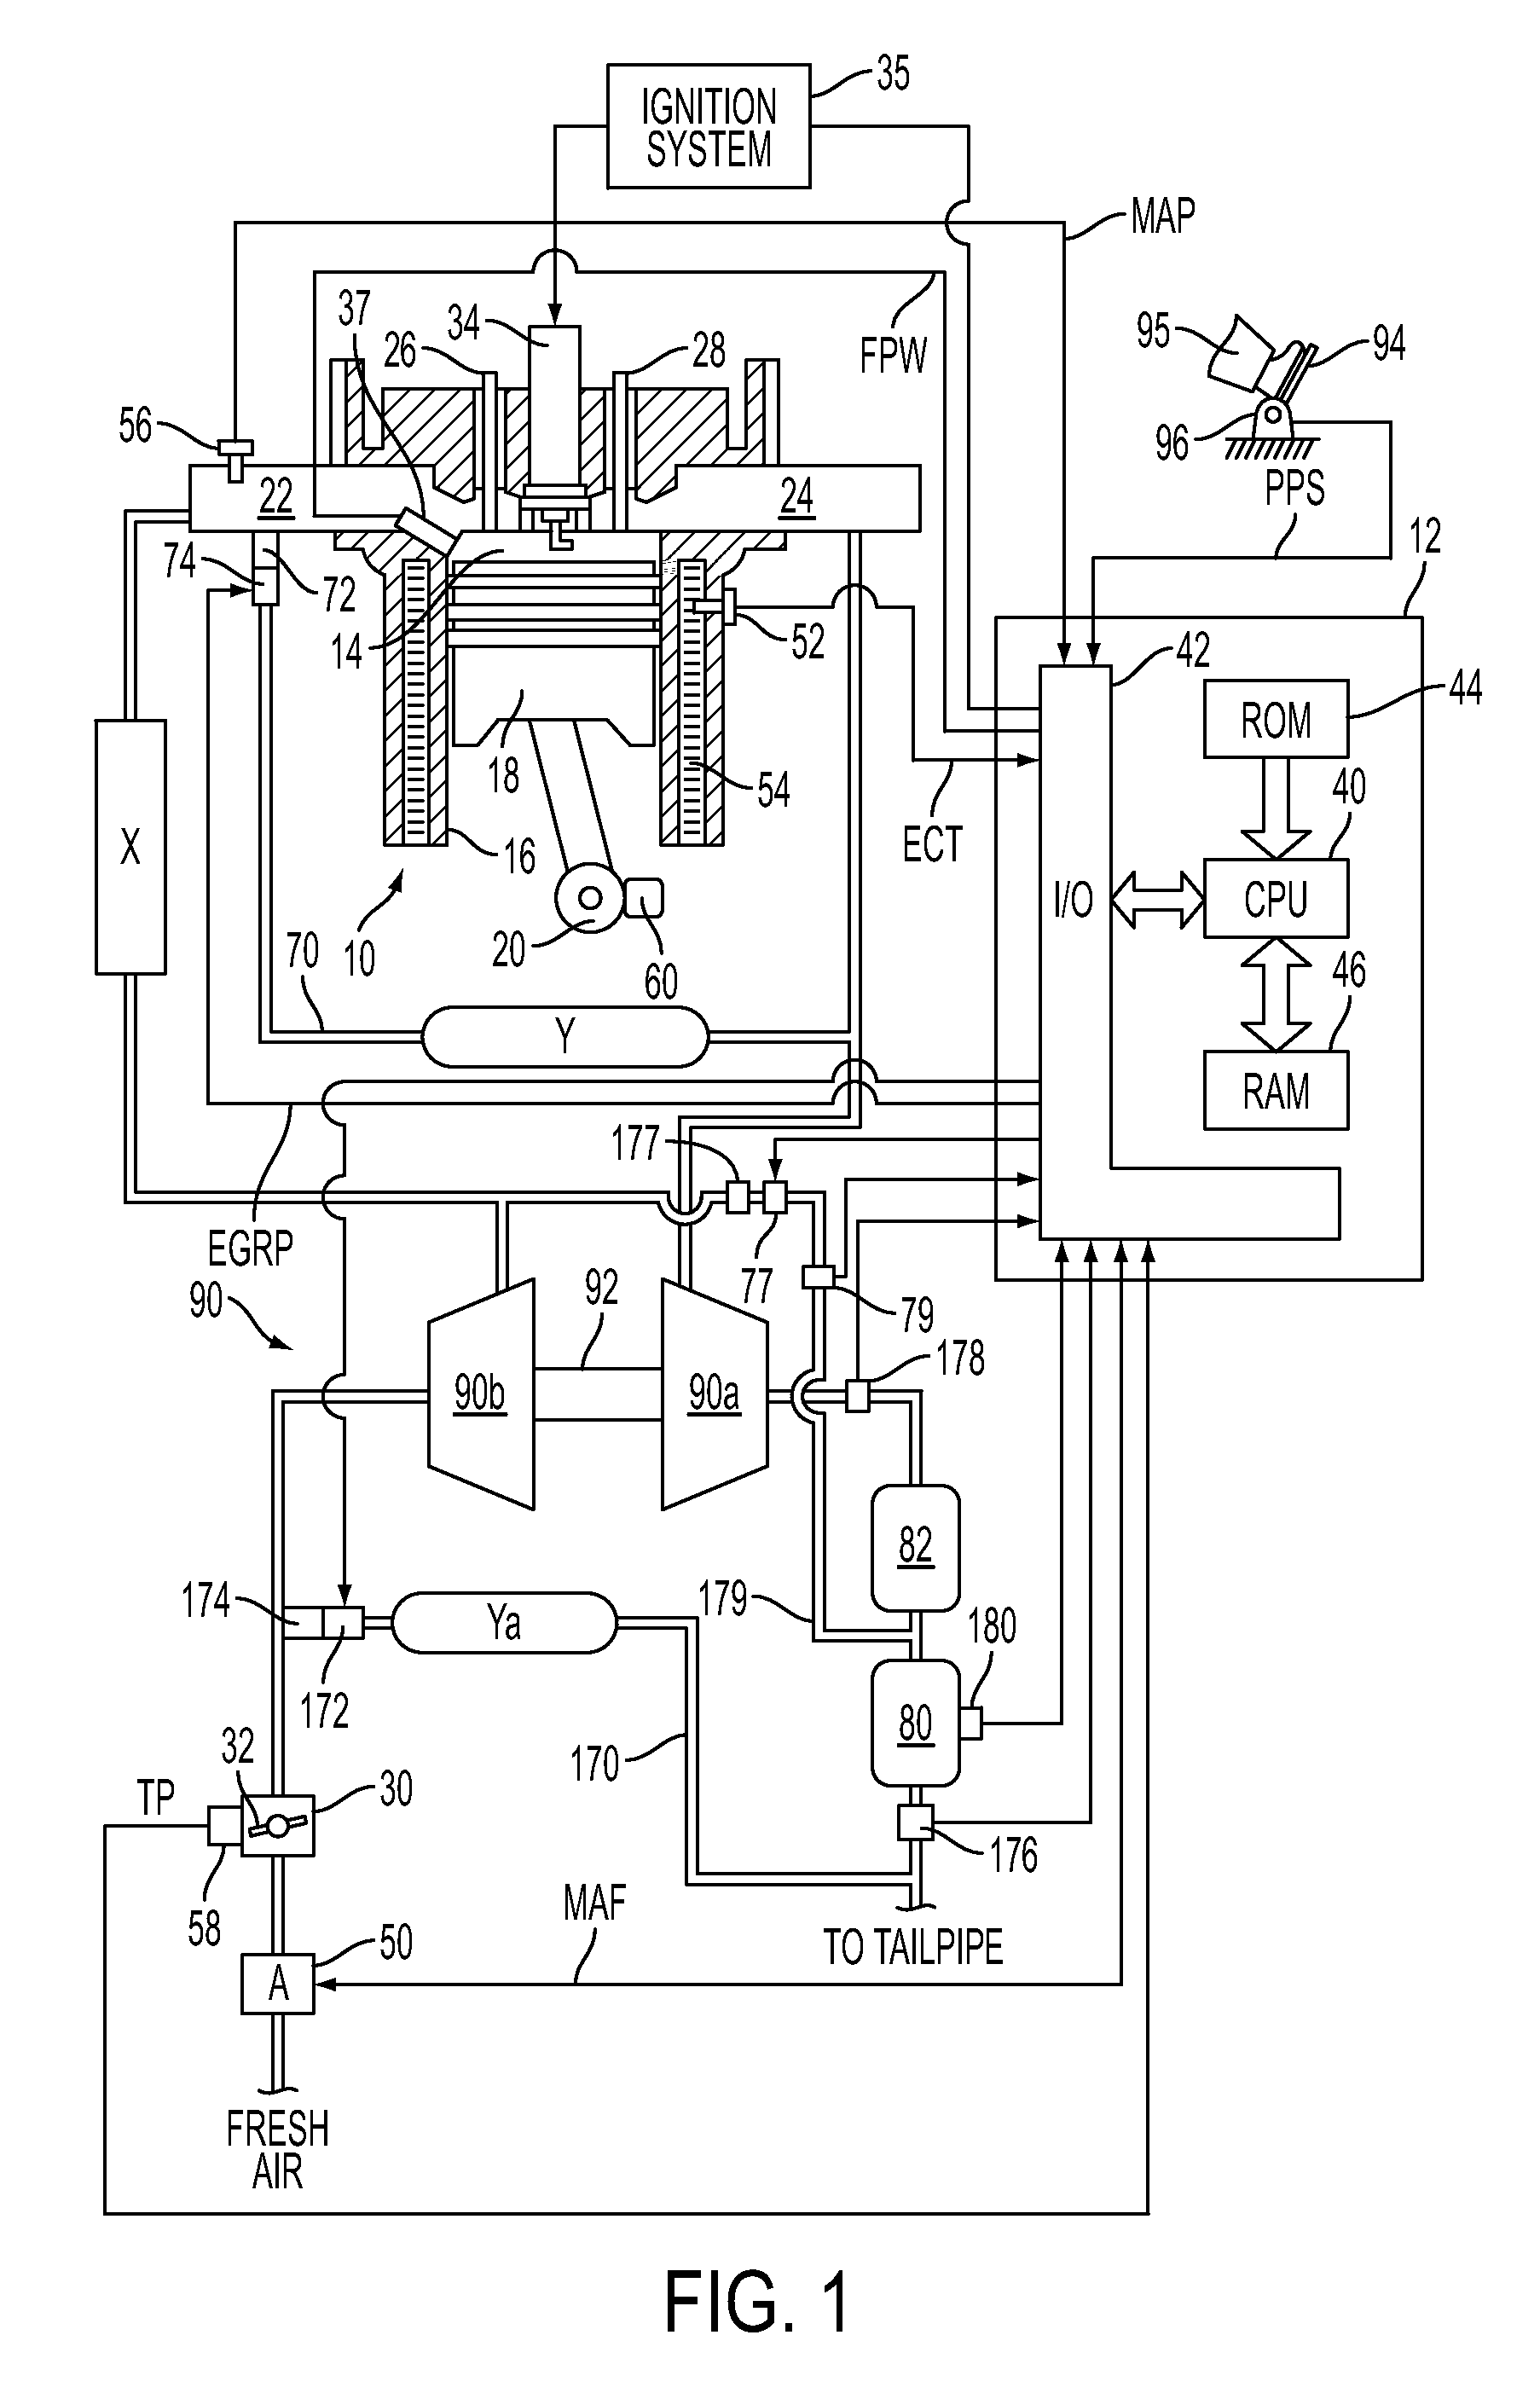 System for regenerating a particulate filter and controlling egr